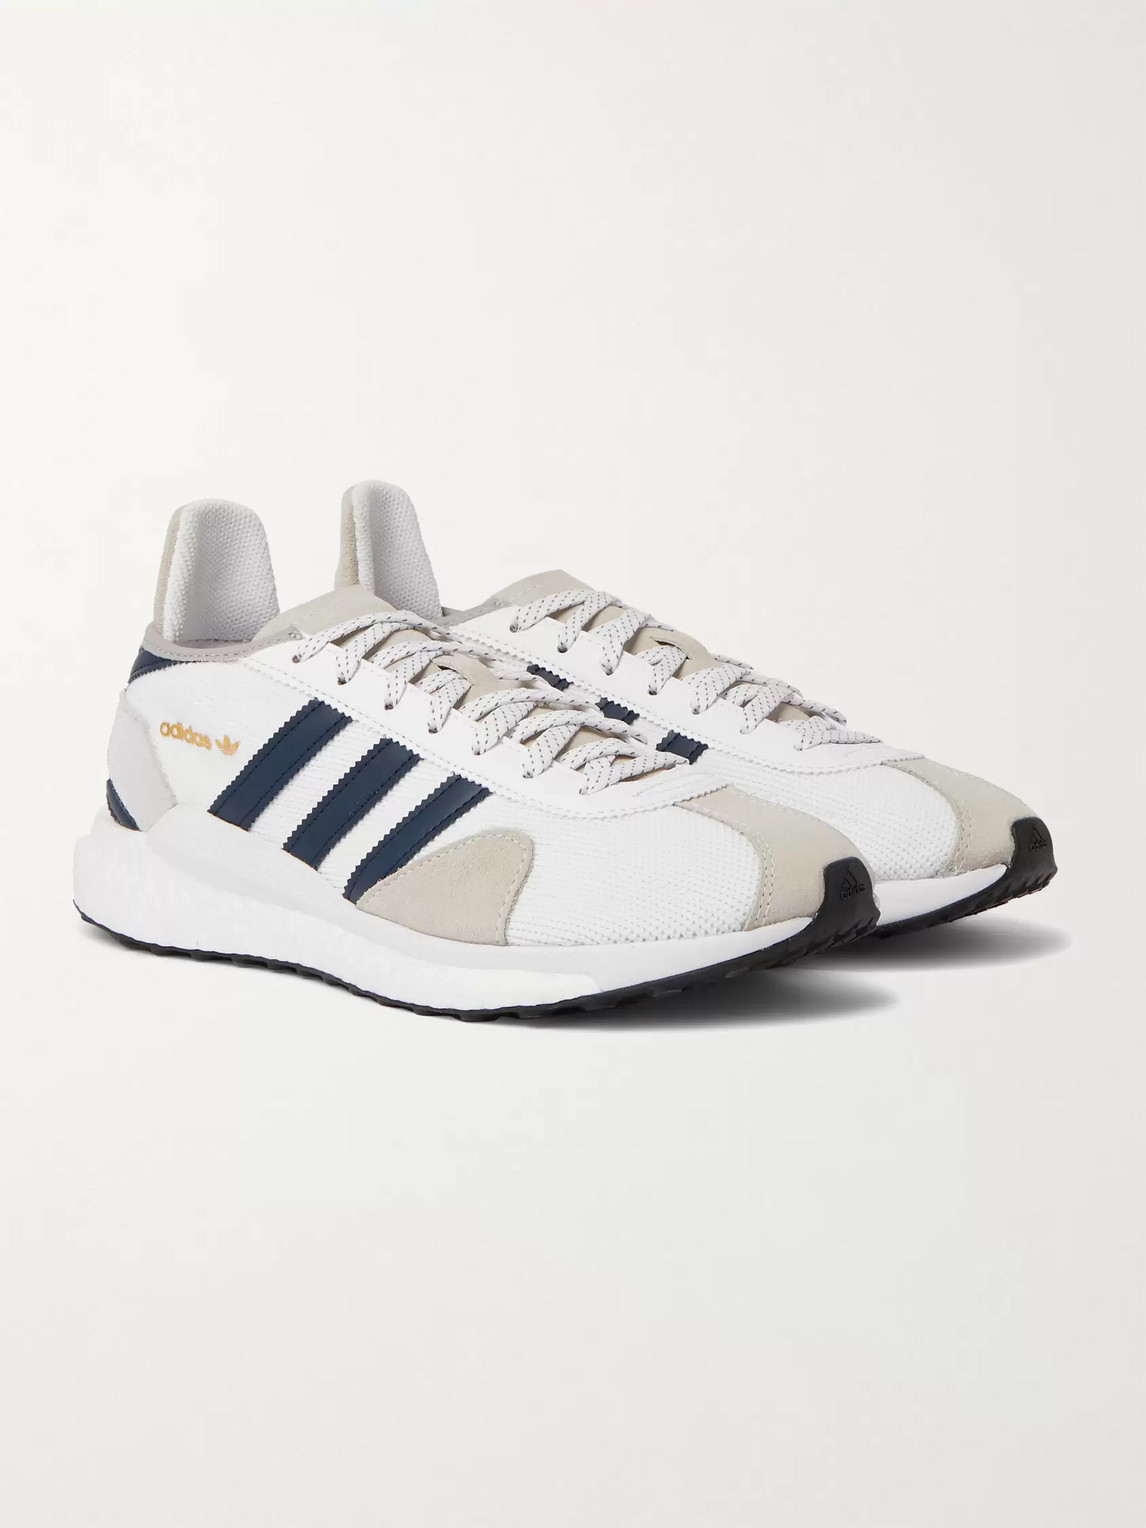 Adidas Consortium Human Made Tokio Solar Leather-trimmed Mesh And Suede Sneakers In White